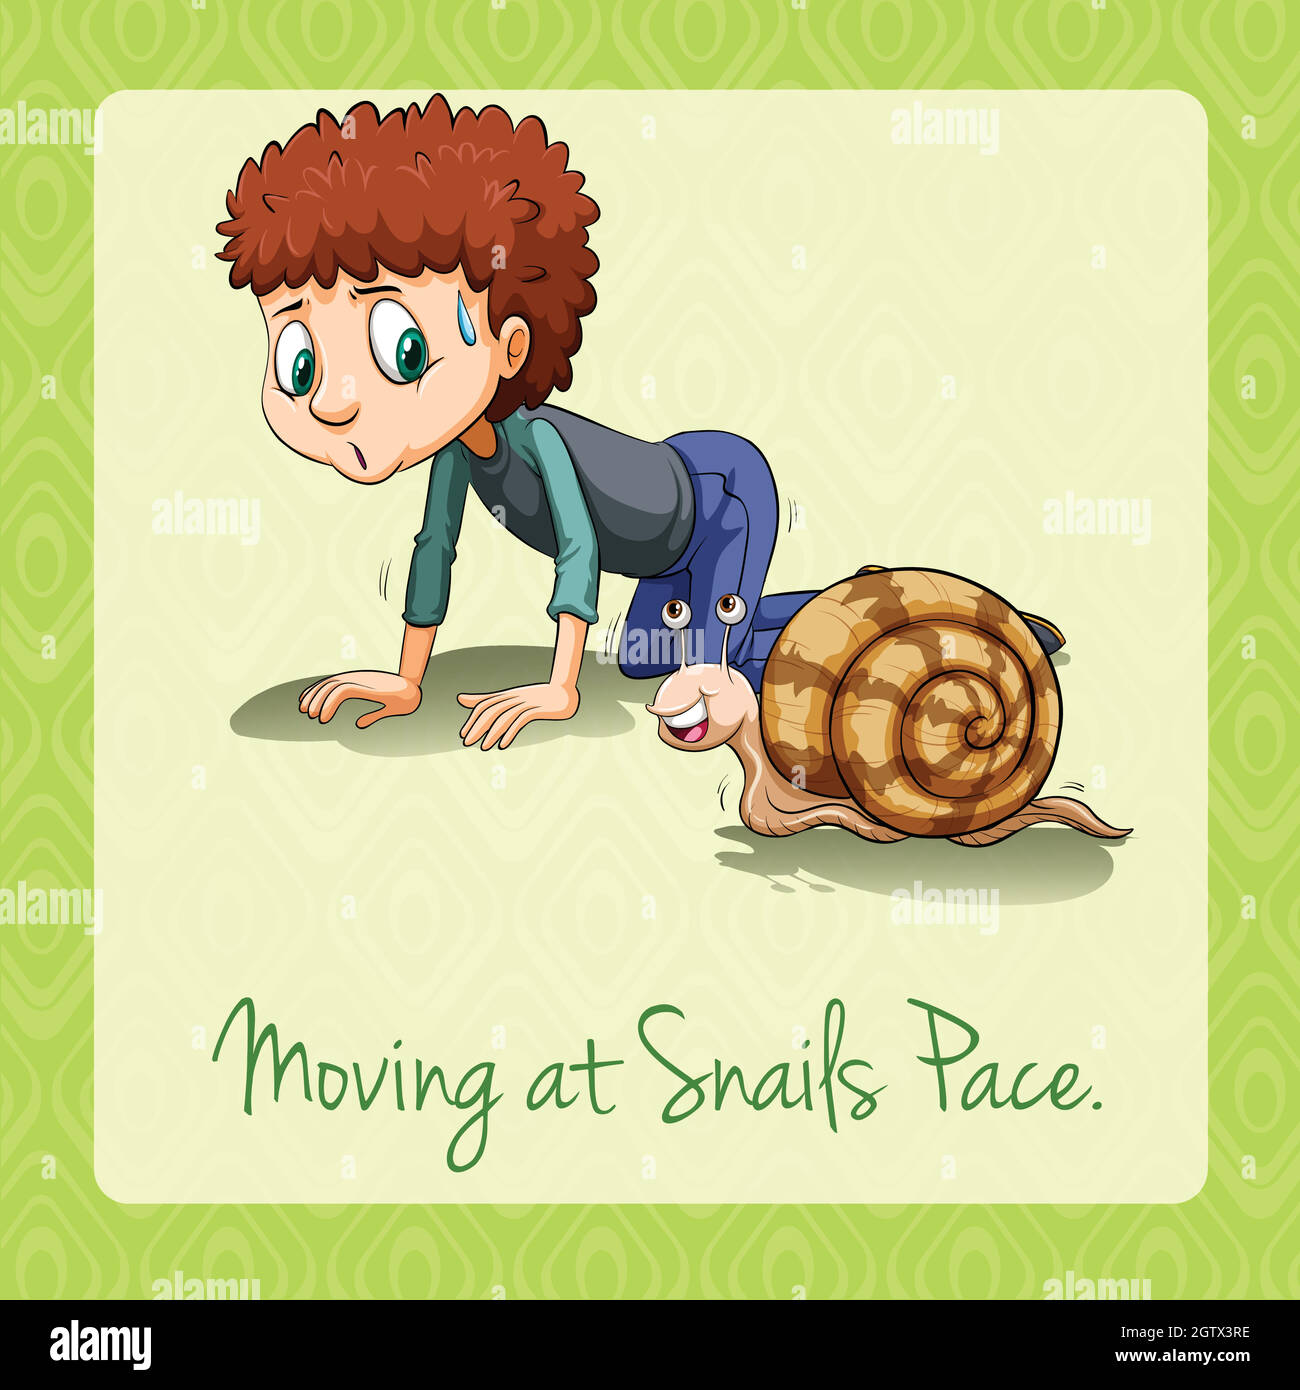 Moving at snails pace Stock Vector